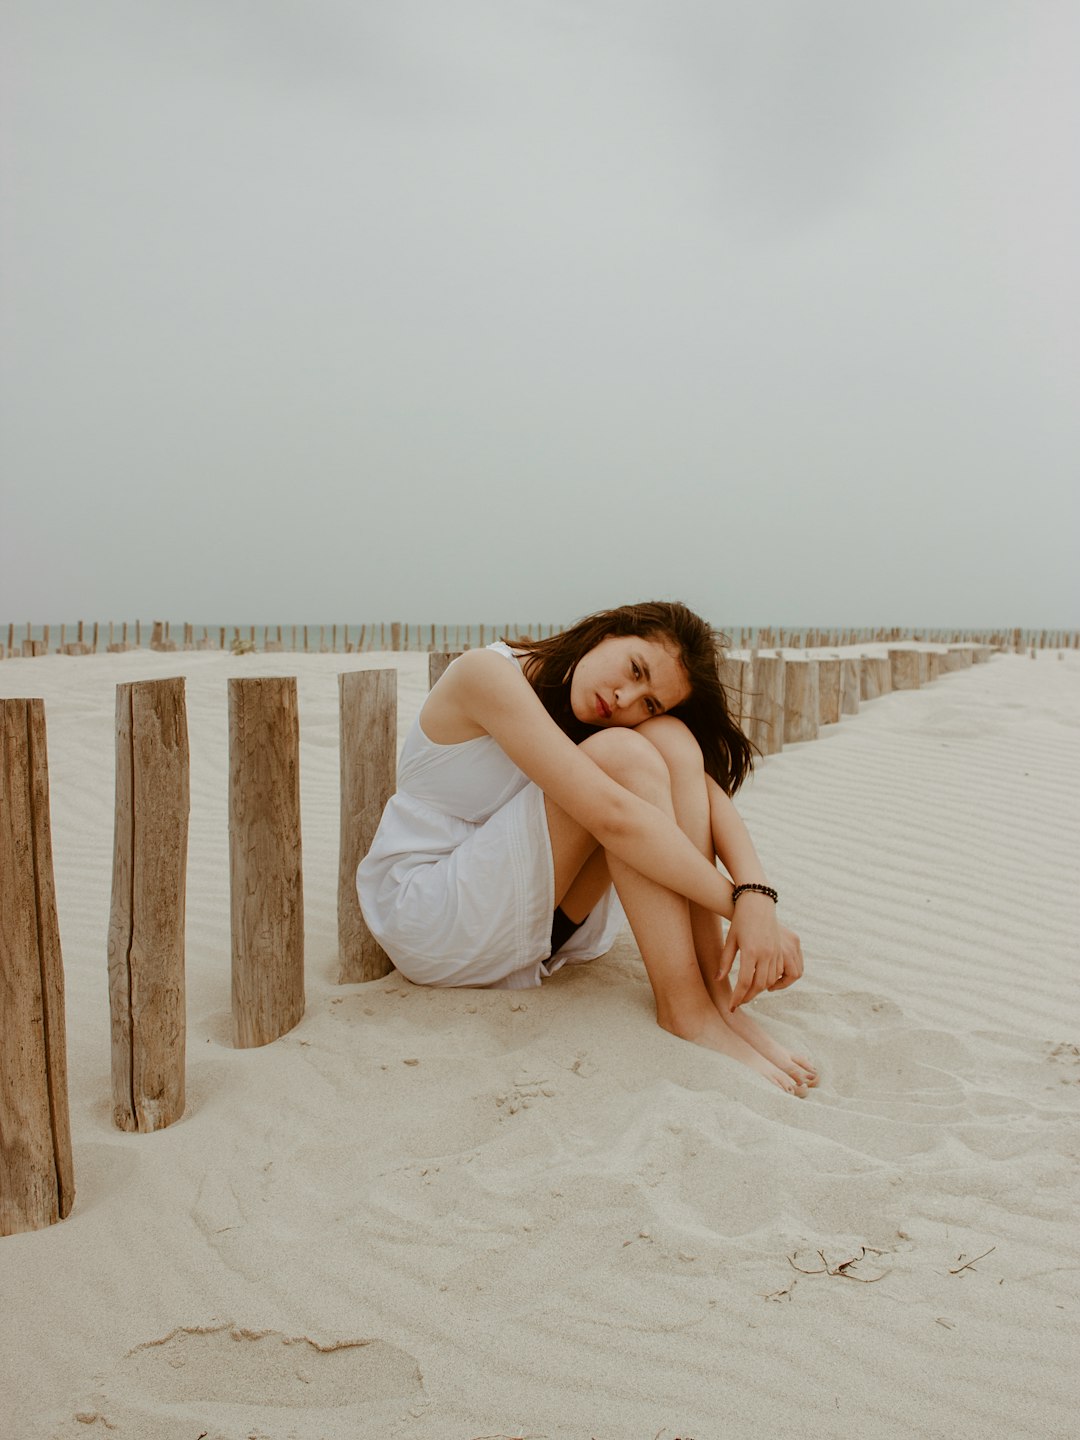 woman in white dress sitting on white sand during daytime